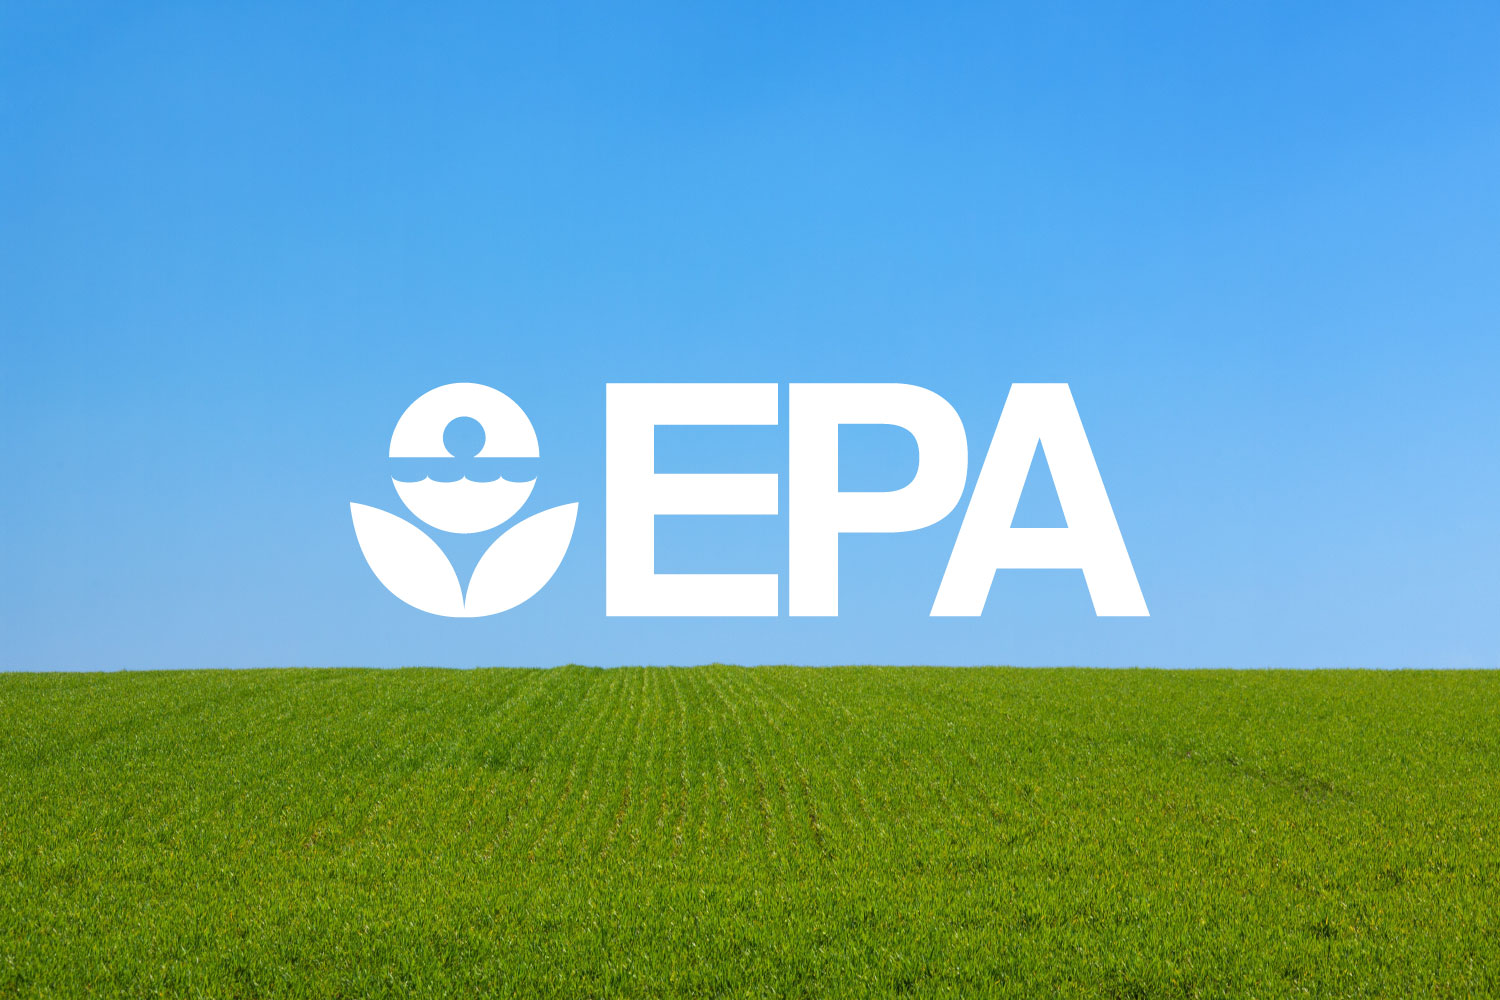 Industries Need To Challenge EPA’s Decision To Disregard Statutorily Required Exemptions